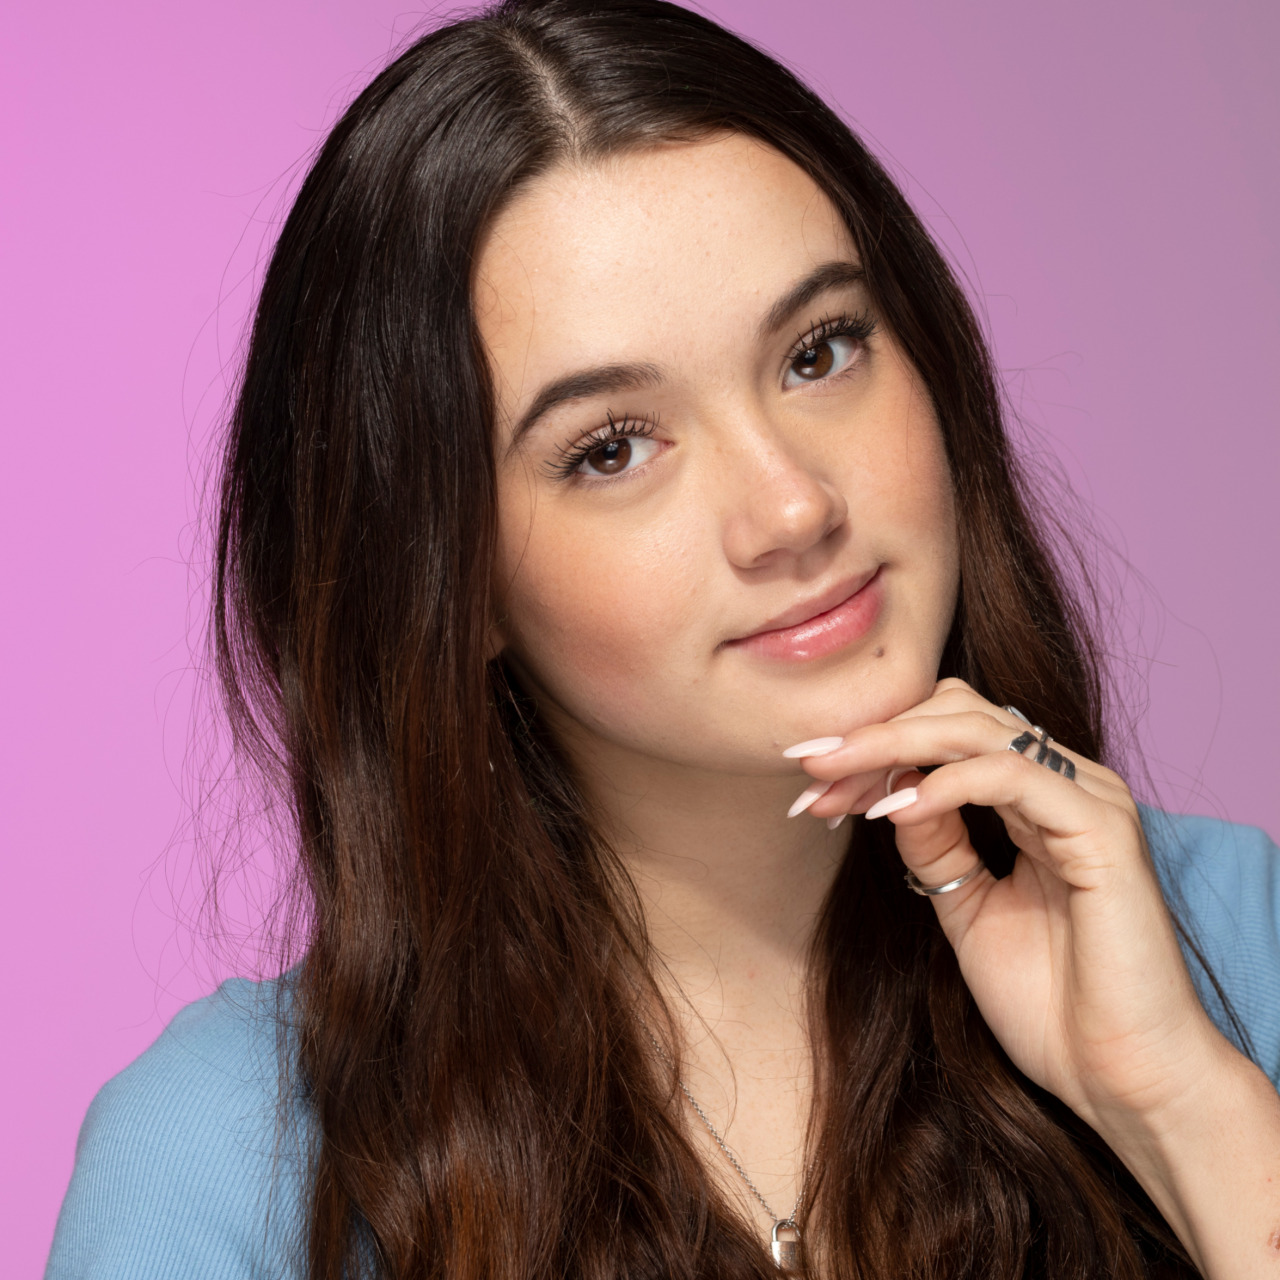 Fashion Spotlight: Fiona Frills16-year-old beauty, fashion, and lifestyle influencer and entrepreneur Fiona Frills launched her YouTube channel at the age of 10, and has since amassed over 1 Million followers. At the age of 13, Fiona decided to turn...